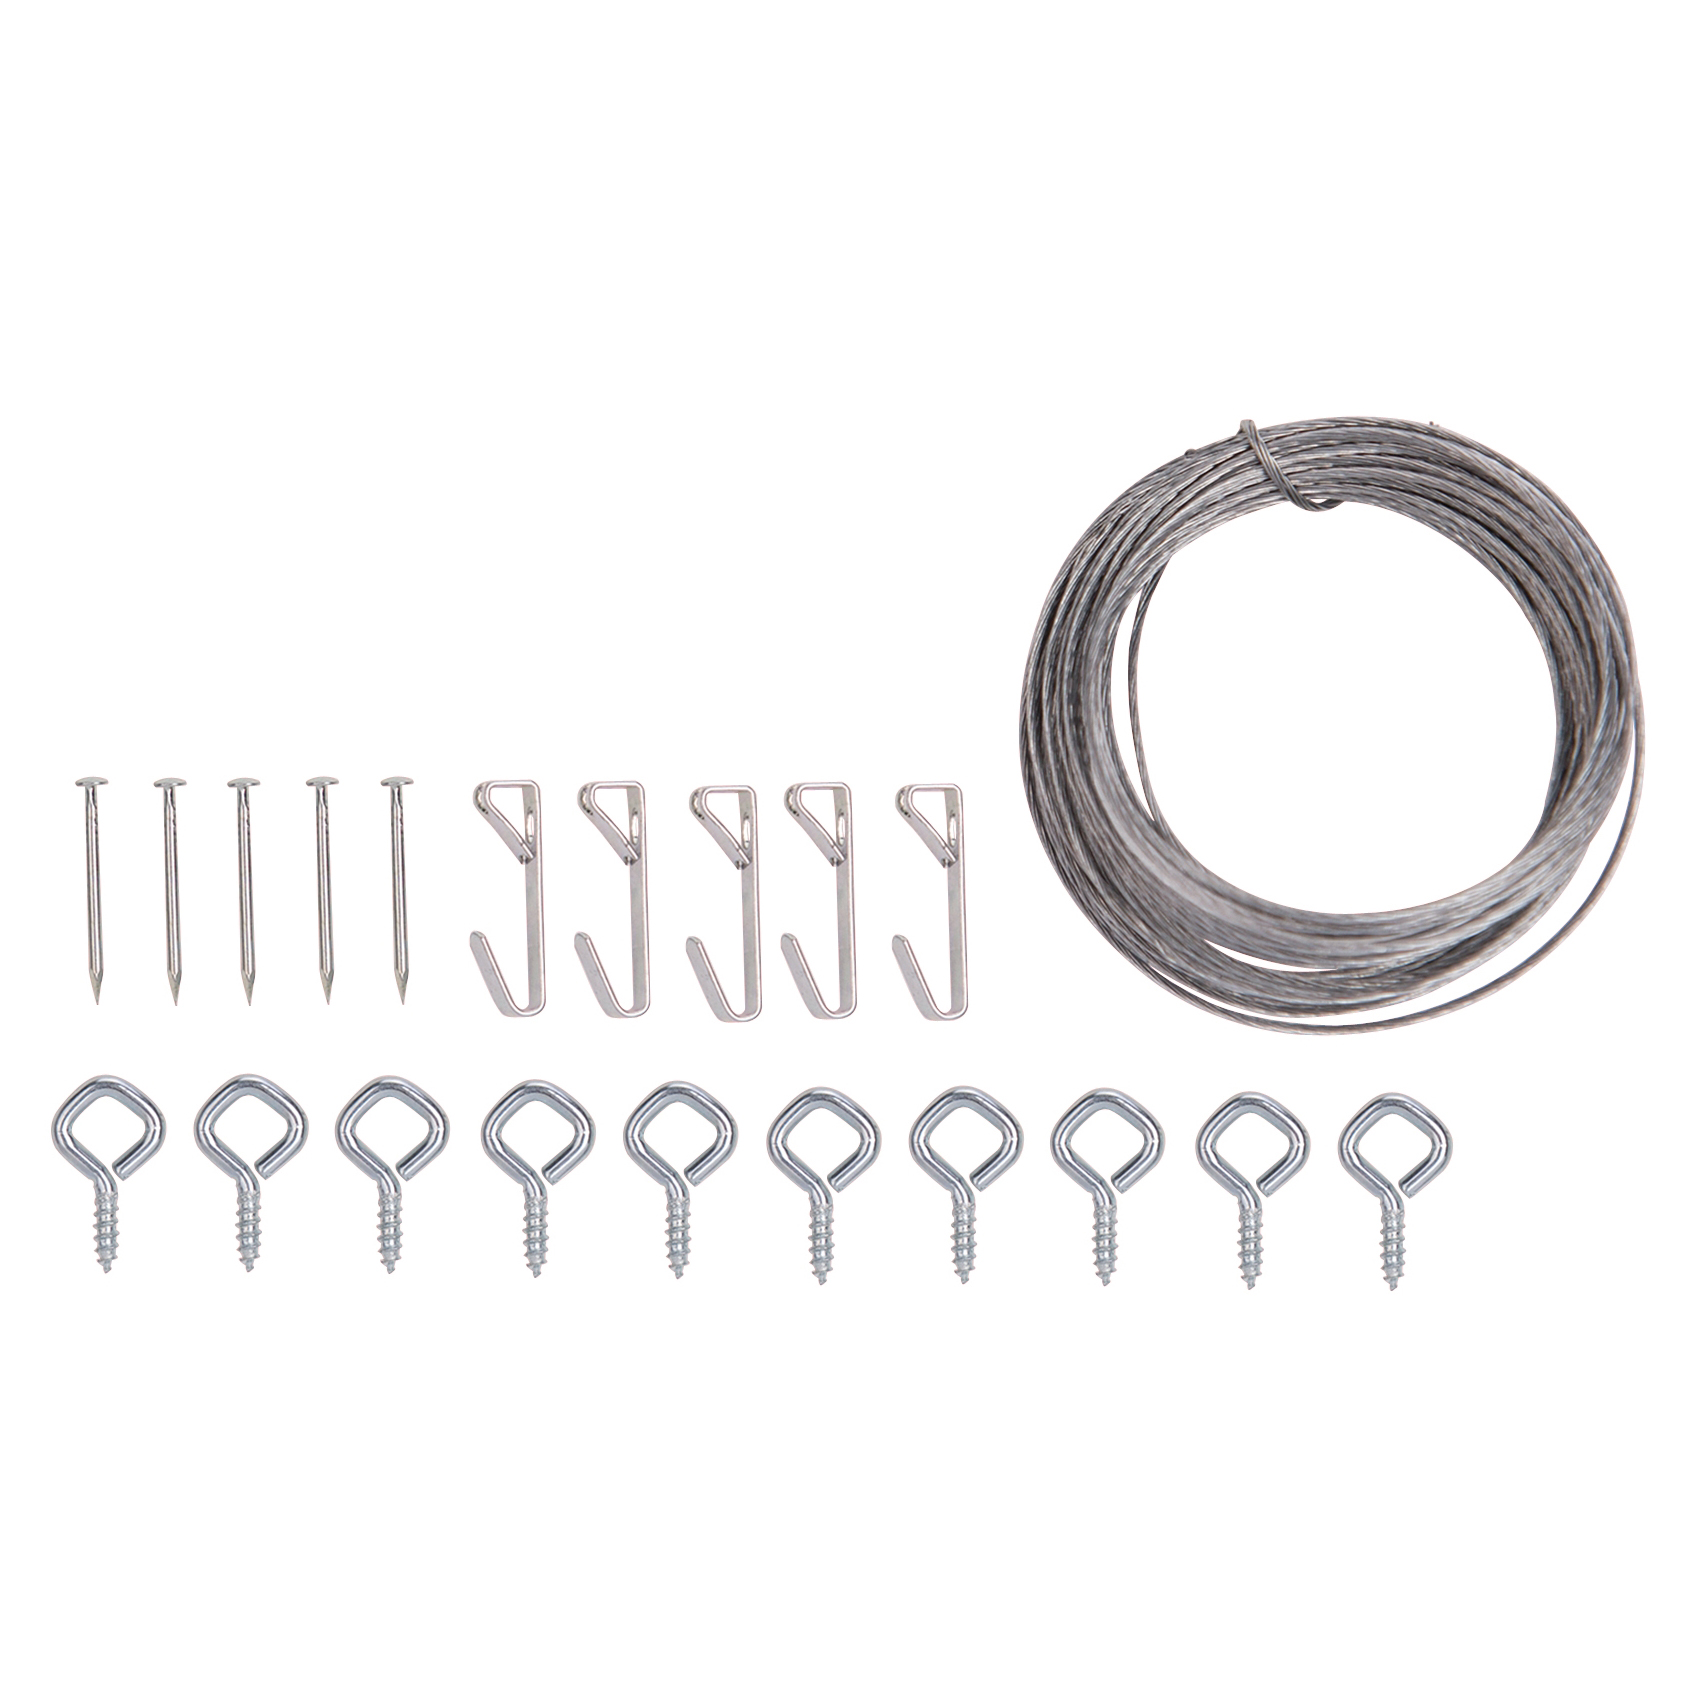 PH-121123-PS Picture Hanging Kit, 10 lb, Steel, Zinc, Zinc, Nail-In Mounting